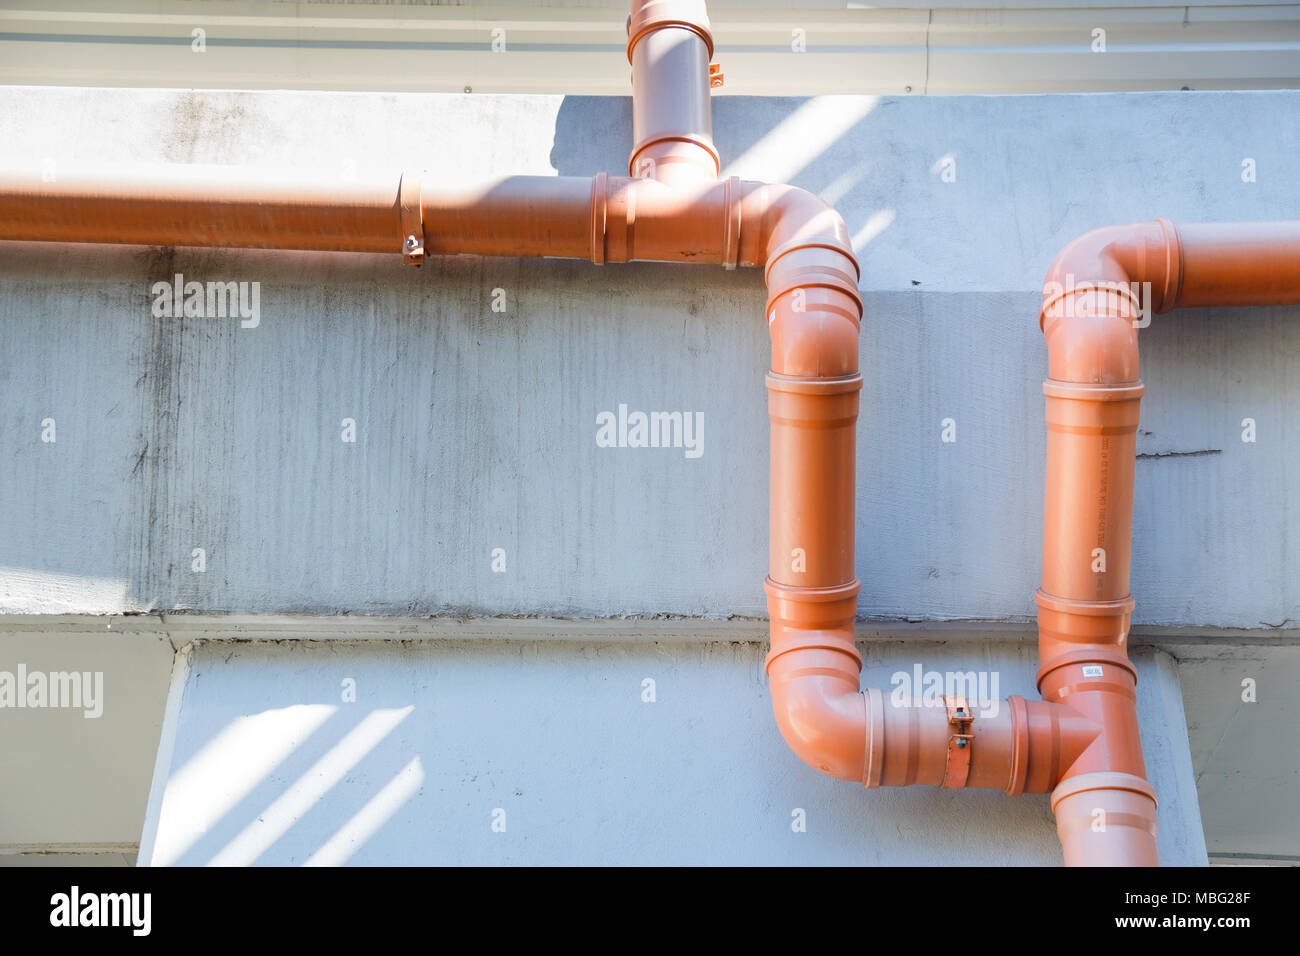 The storm water system pipes of the bridge. Stock Photo